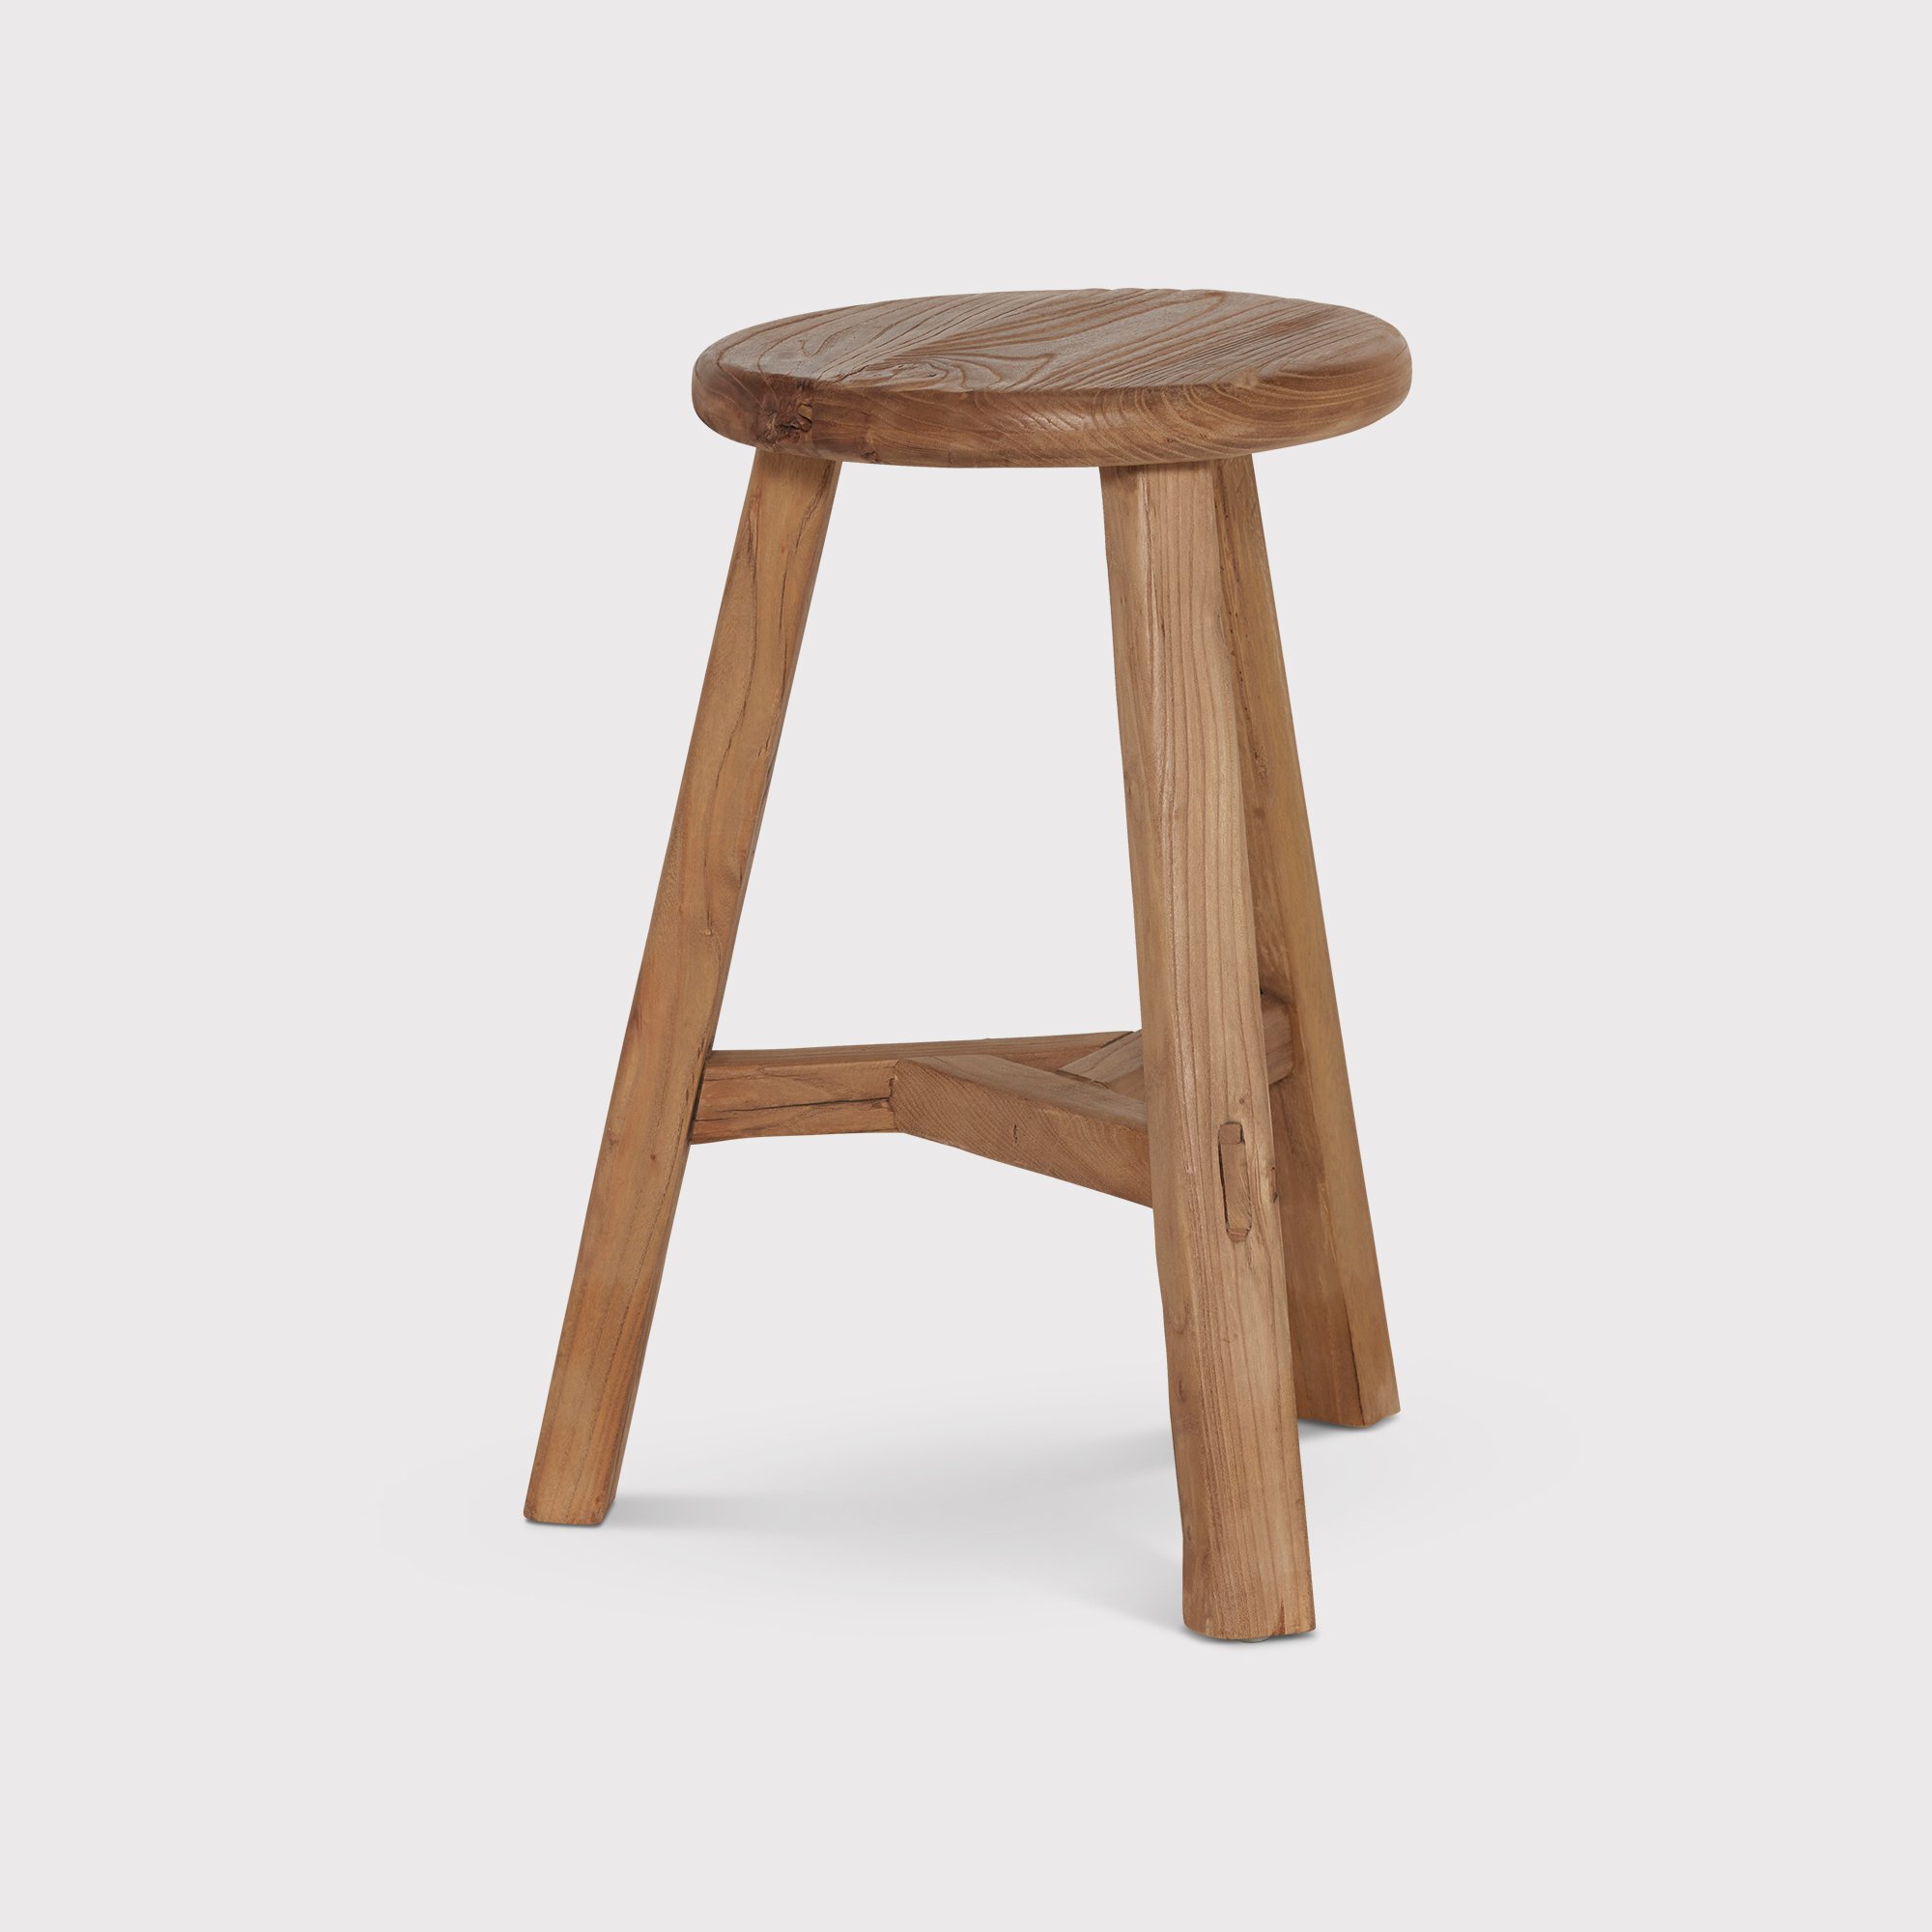 Timothy Oulton Abode Thin Top Stool, Pine Wood | Barker & Stonehouse